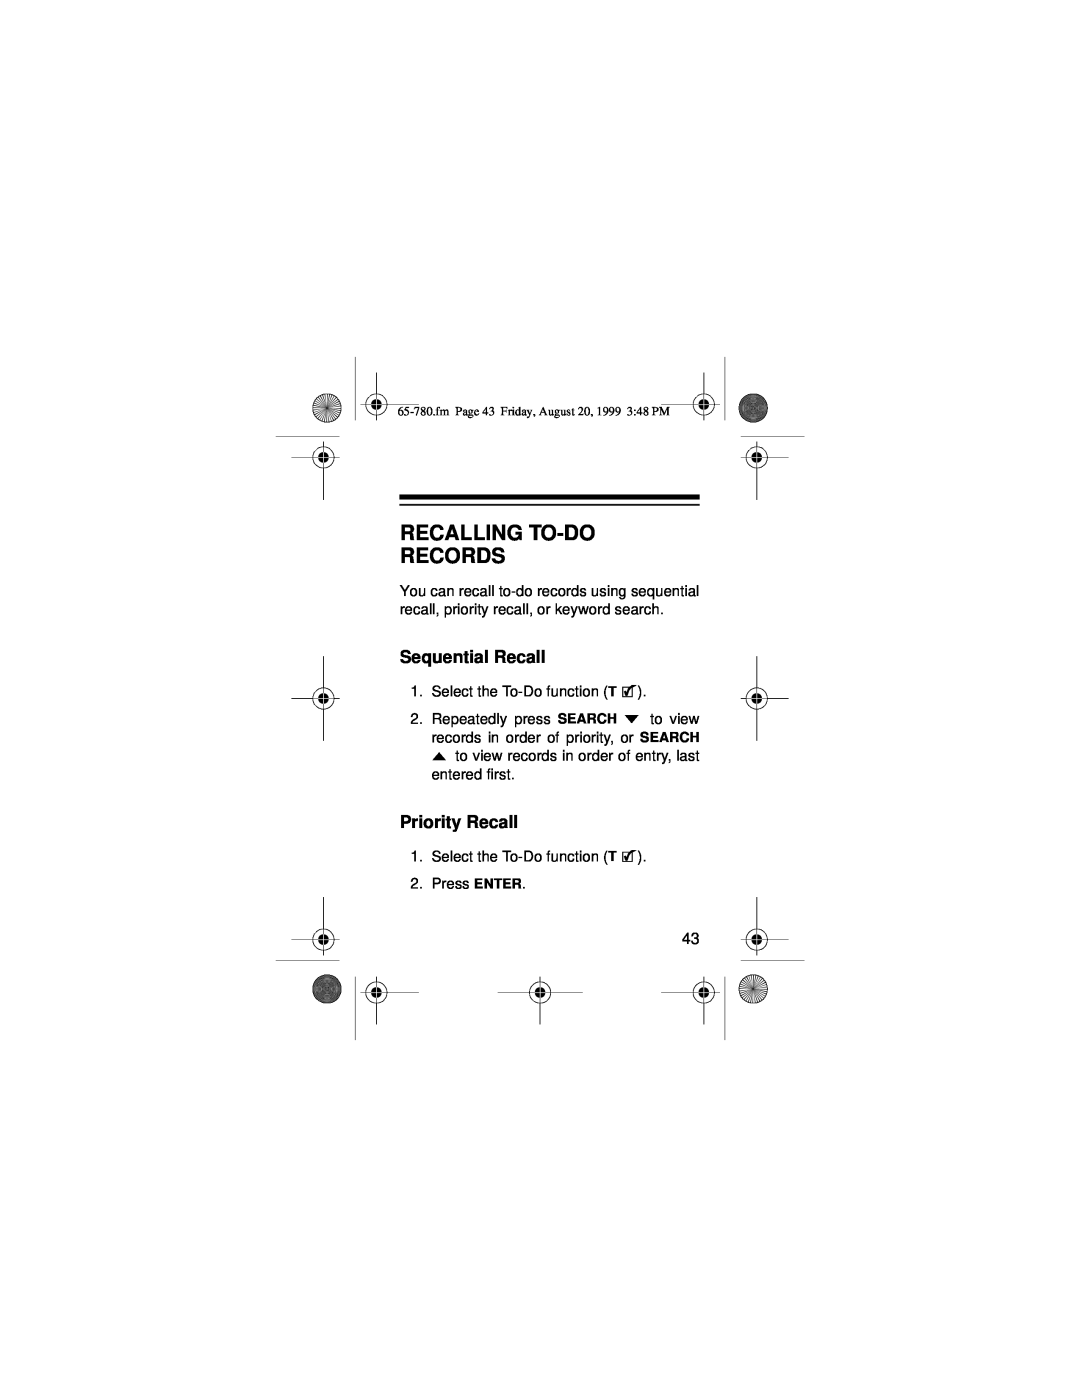 Samsung 256K owner manual Recalling To-Do Records, Priority Recall, Sequential Recall, Select the To-Do function T 